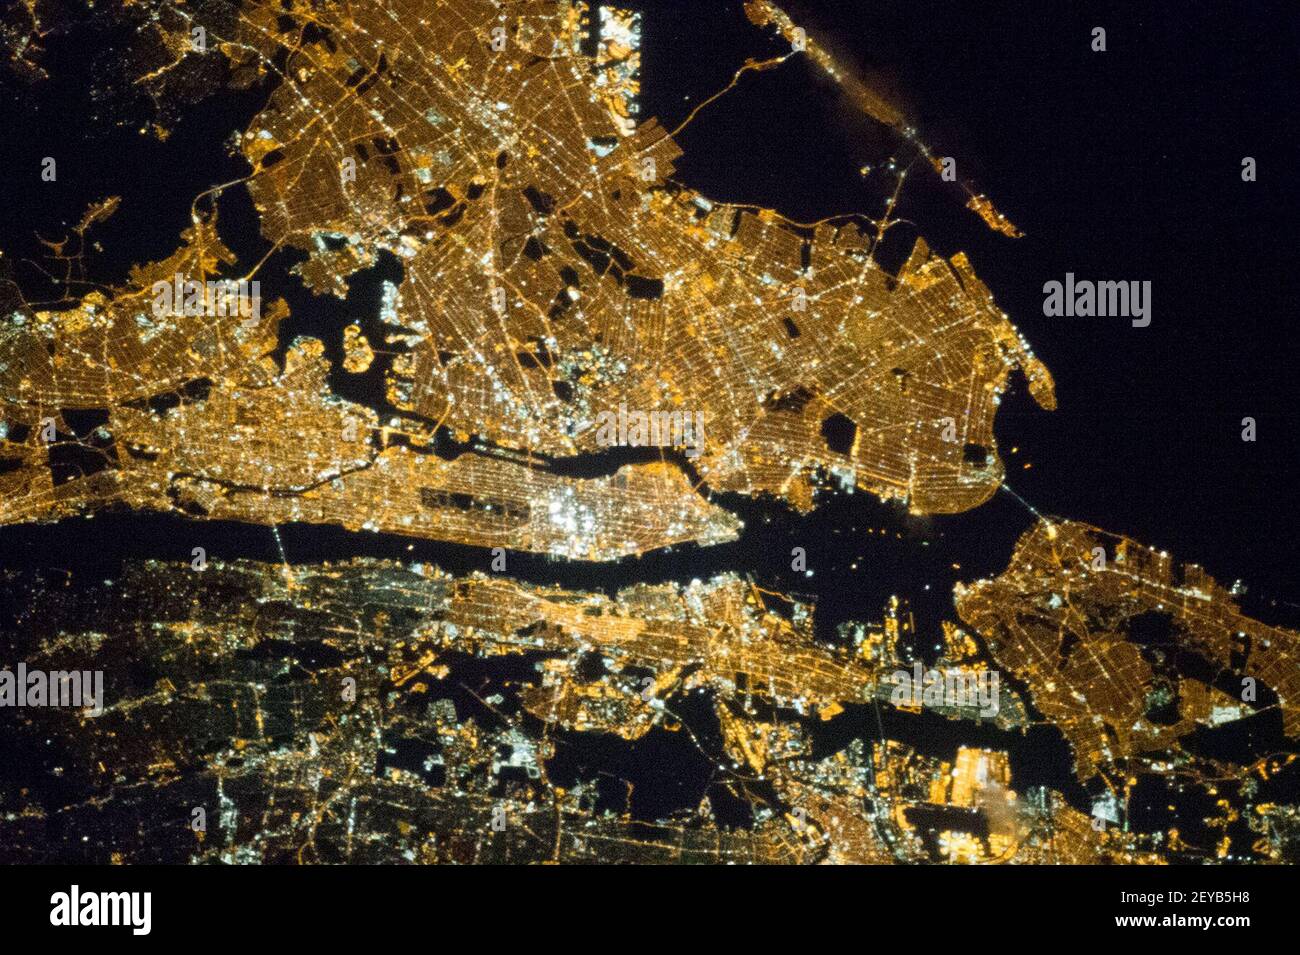 One of the Expedition 35 crew members aboard the Earth-orbiting International Space Station exposed this 400 millimeter night image of the greater New York City metropolitan area on March 23, 2103. For orientation purposes, note that Manhattan runs horizontal through the frame from left to the midpoint. Central Park is just a little to the left of frame center. Photo Credit: NASA/Sipa USA Stock Photo